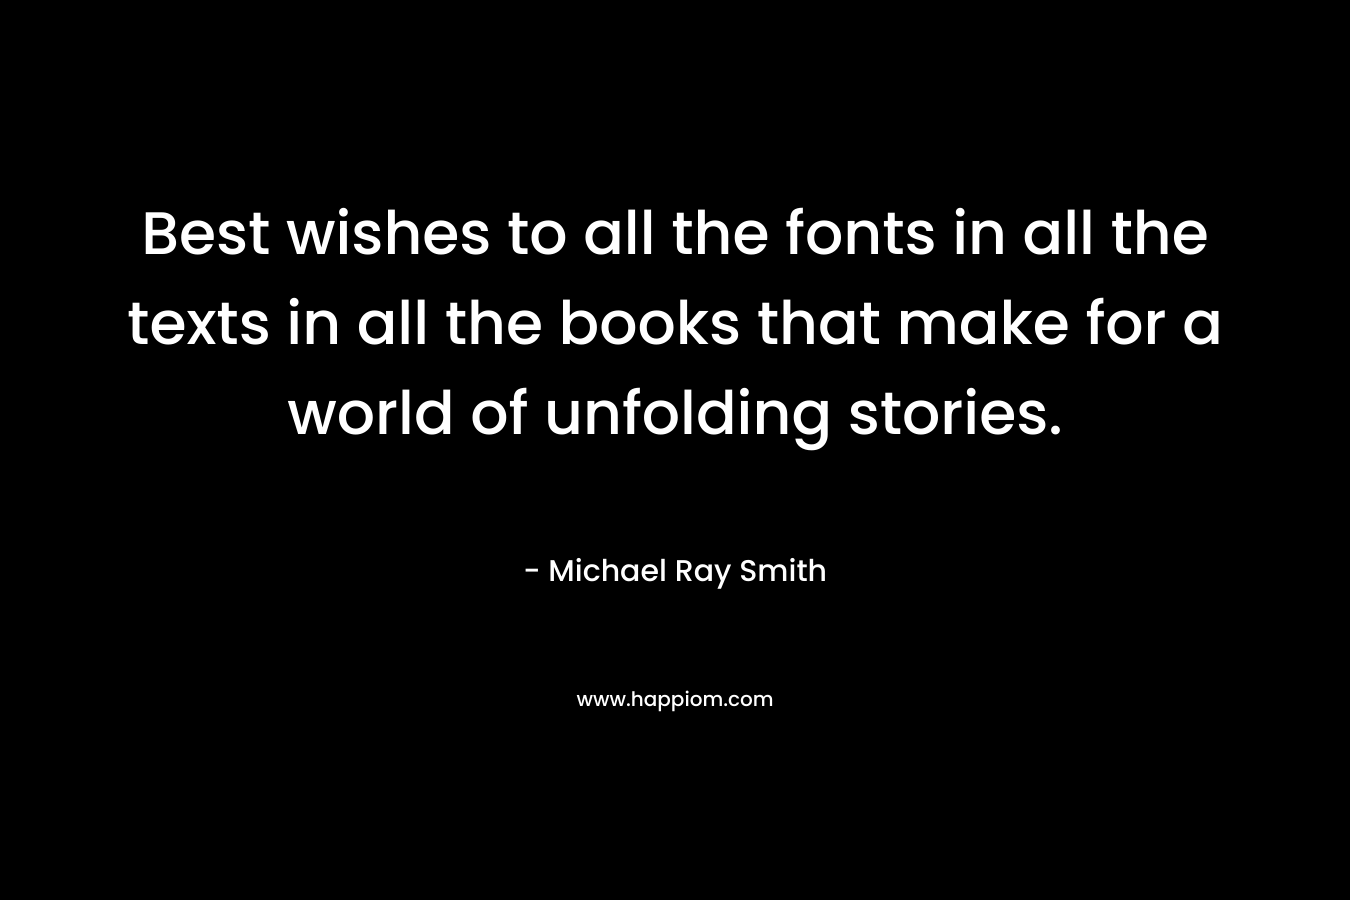 Best wishes to all the fonts in all the texts in all the books that make for a world of unfolding stories.